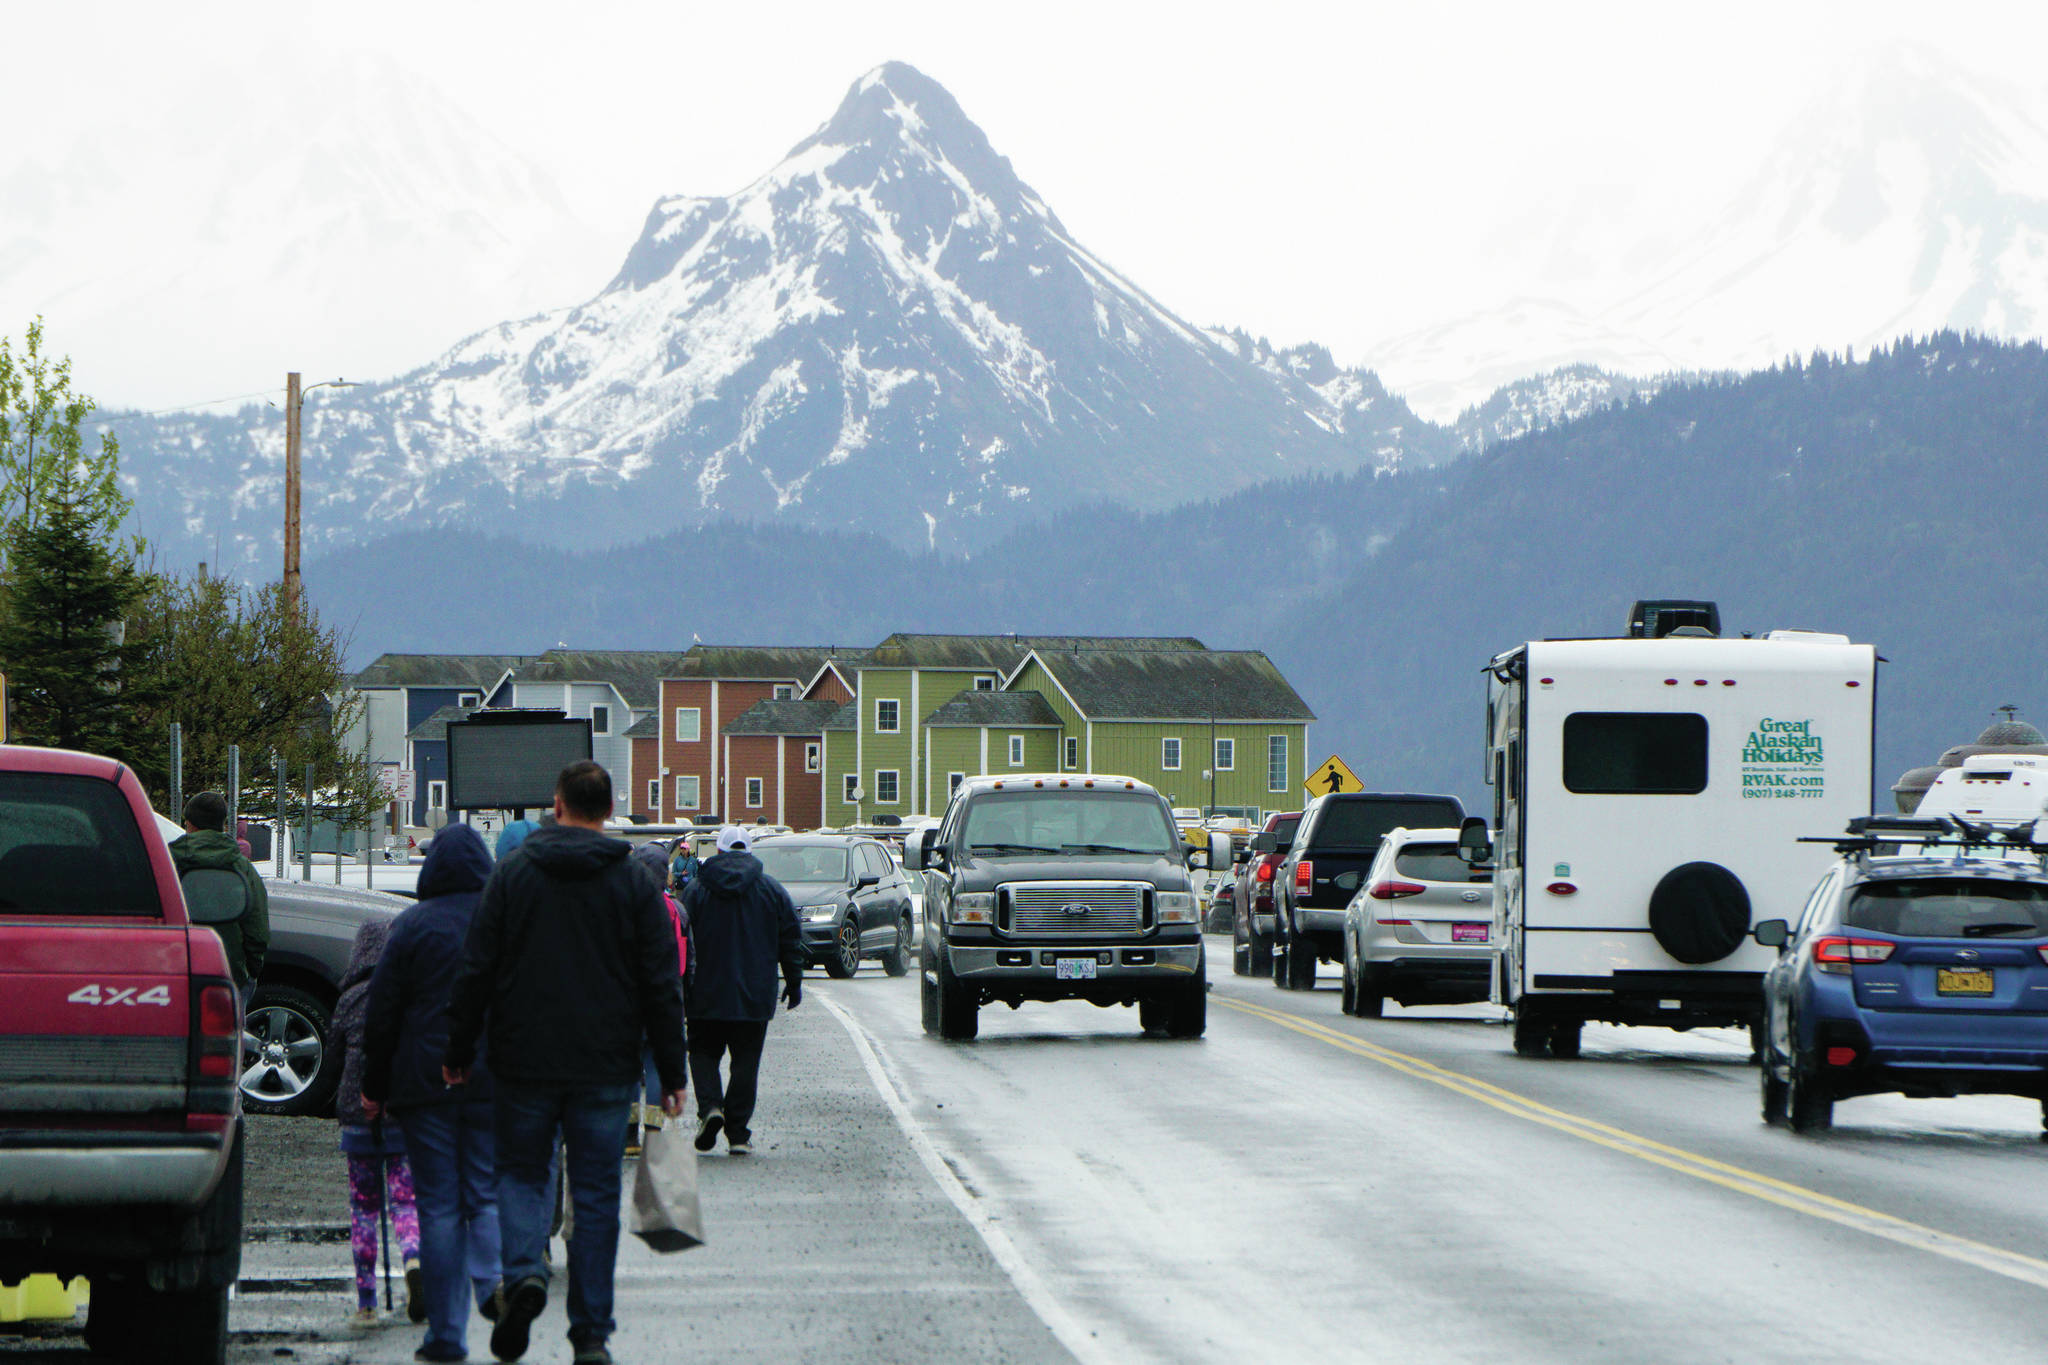 Poot Peak looms over visitors to the Homer Spit on Saturday, May 29, 2021, in Homer, Alaska. (Photo by Michael Armstrong/Homer News)